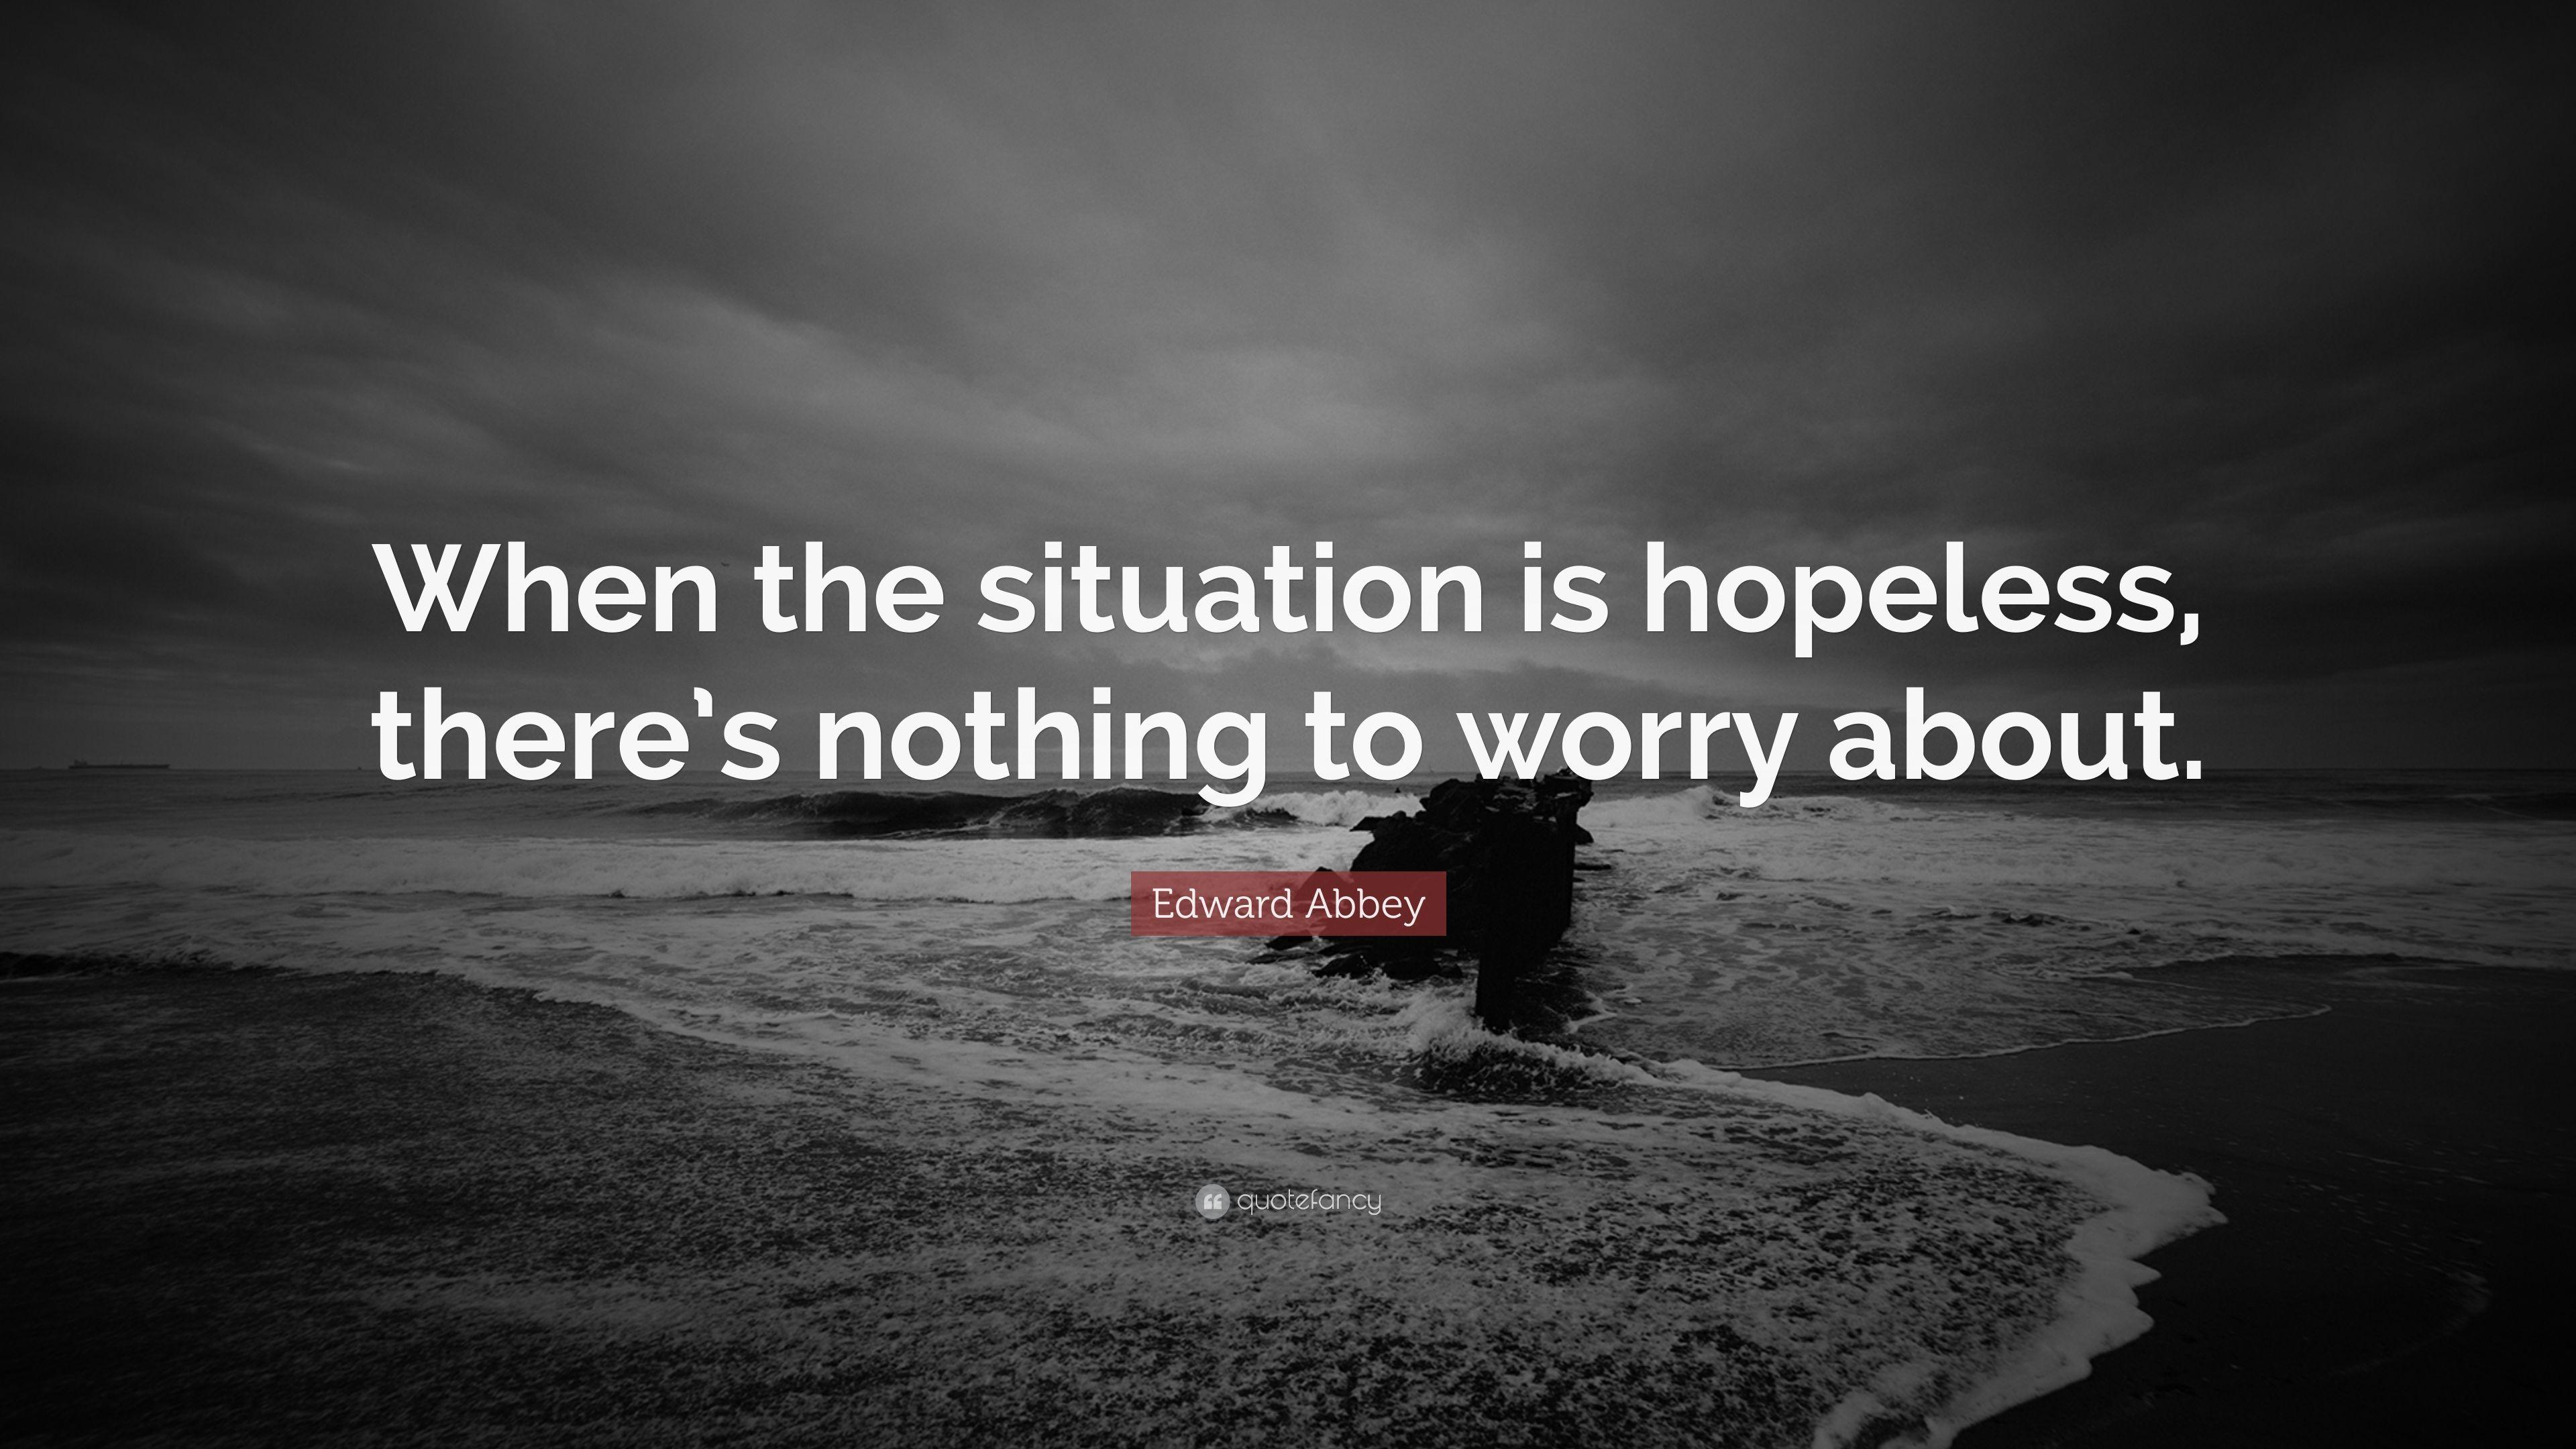 Edward Abbey Quote: “When the situation is hopeless, there's